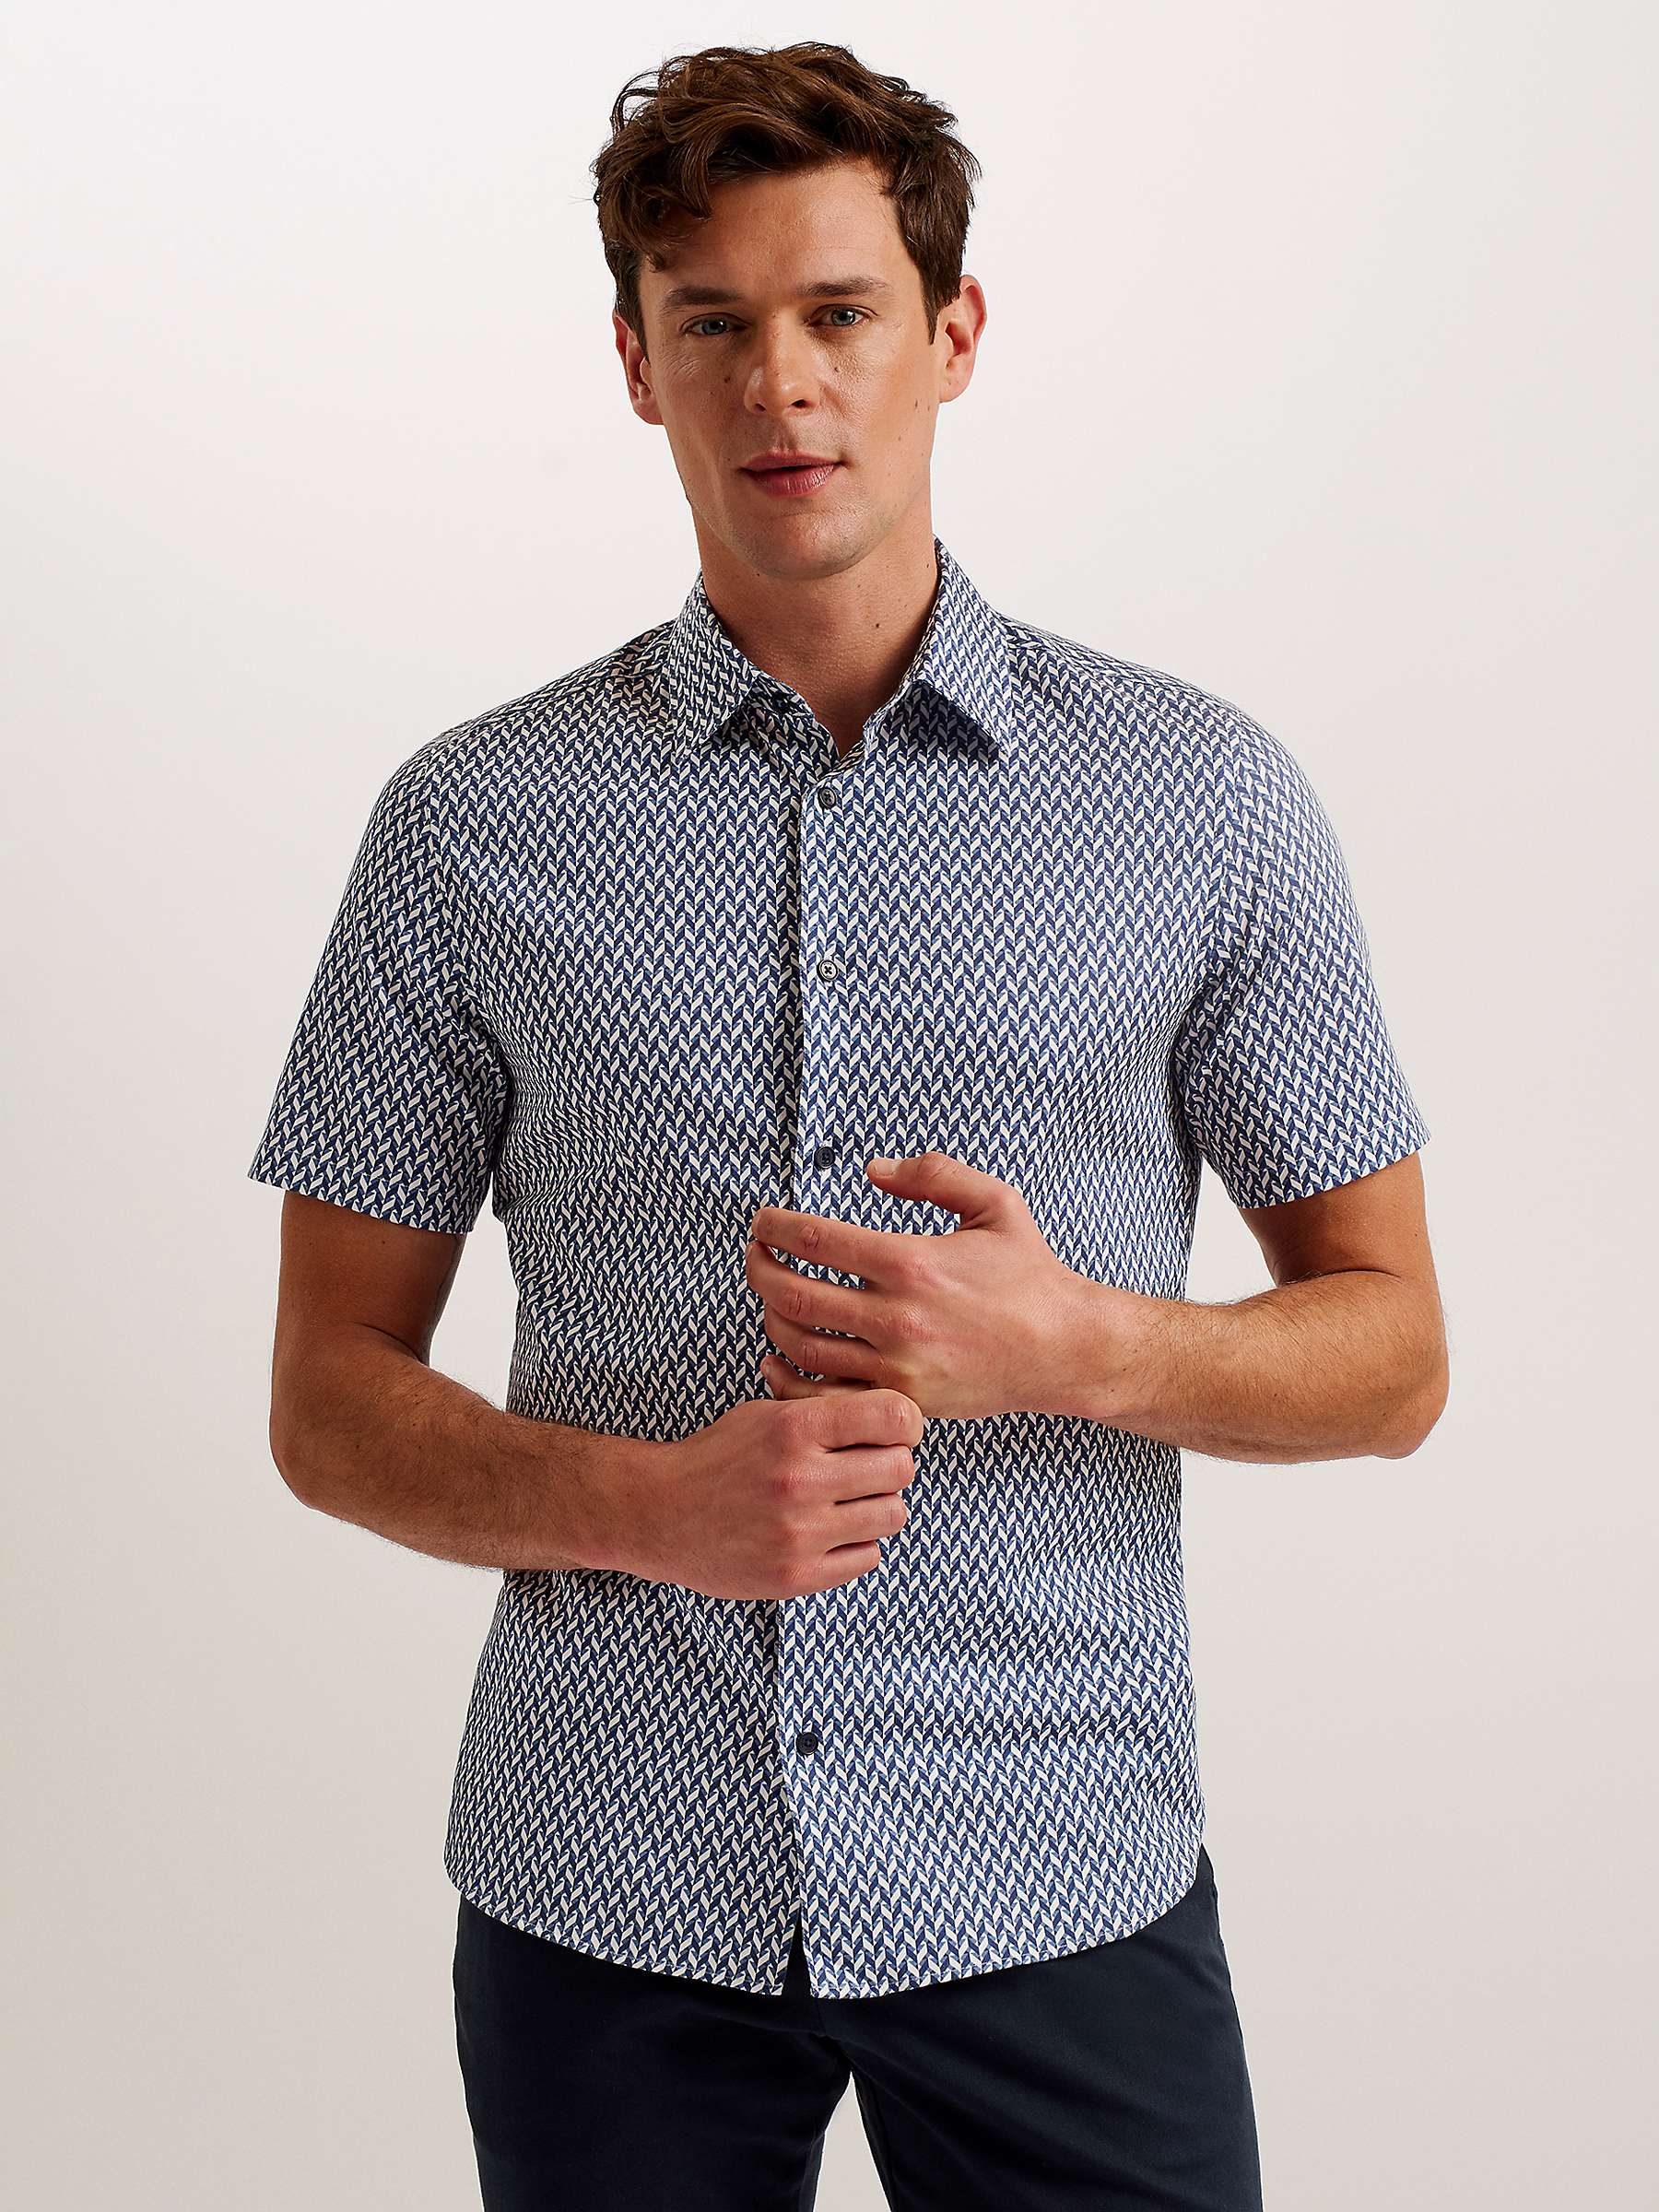 Buy Ted Baker Lacesho Graphic Print Slim Fit Shirt, Navy Online at johnlewis.com